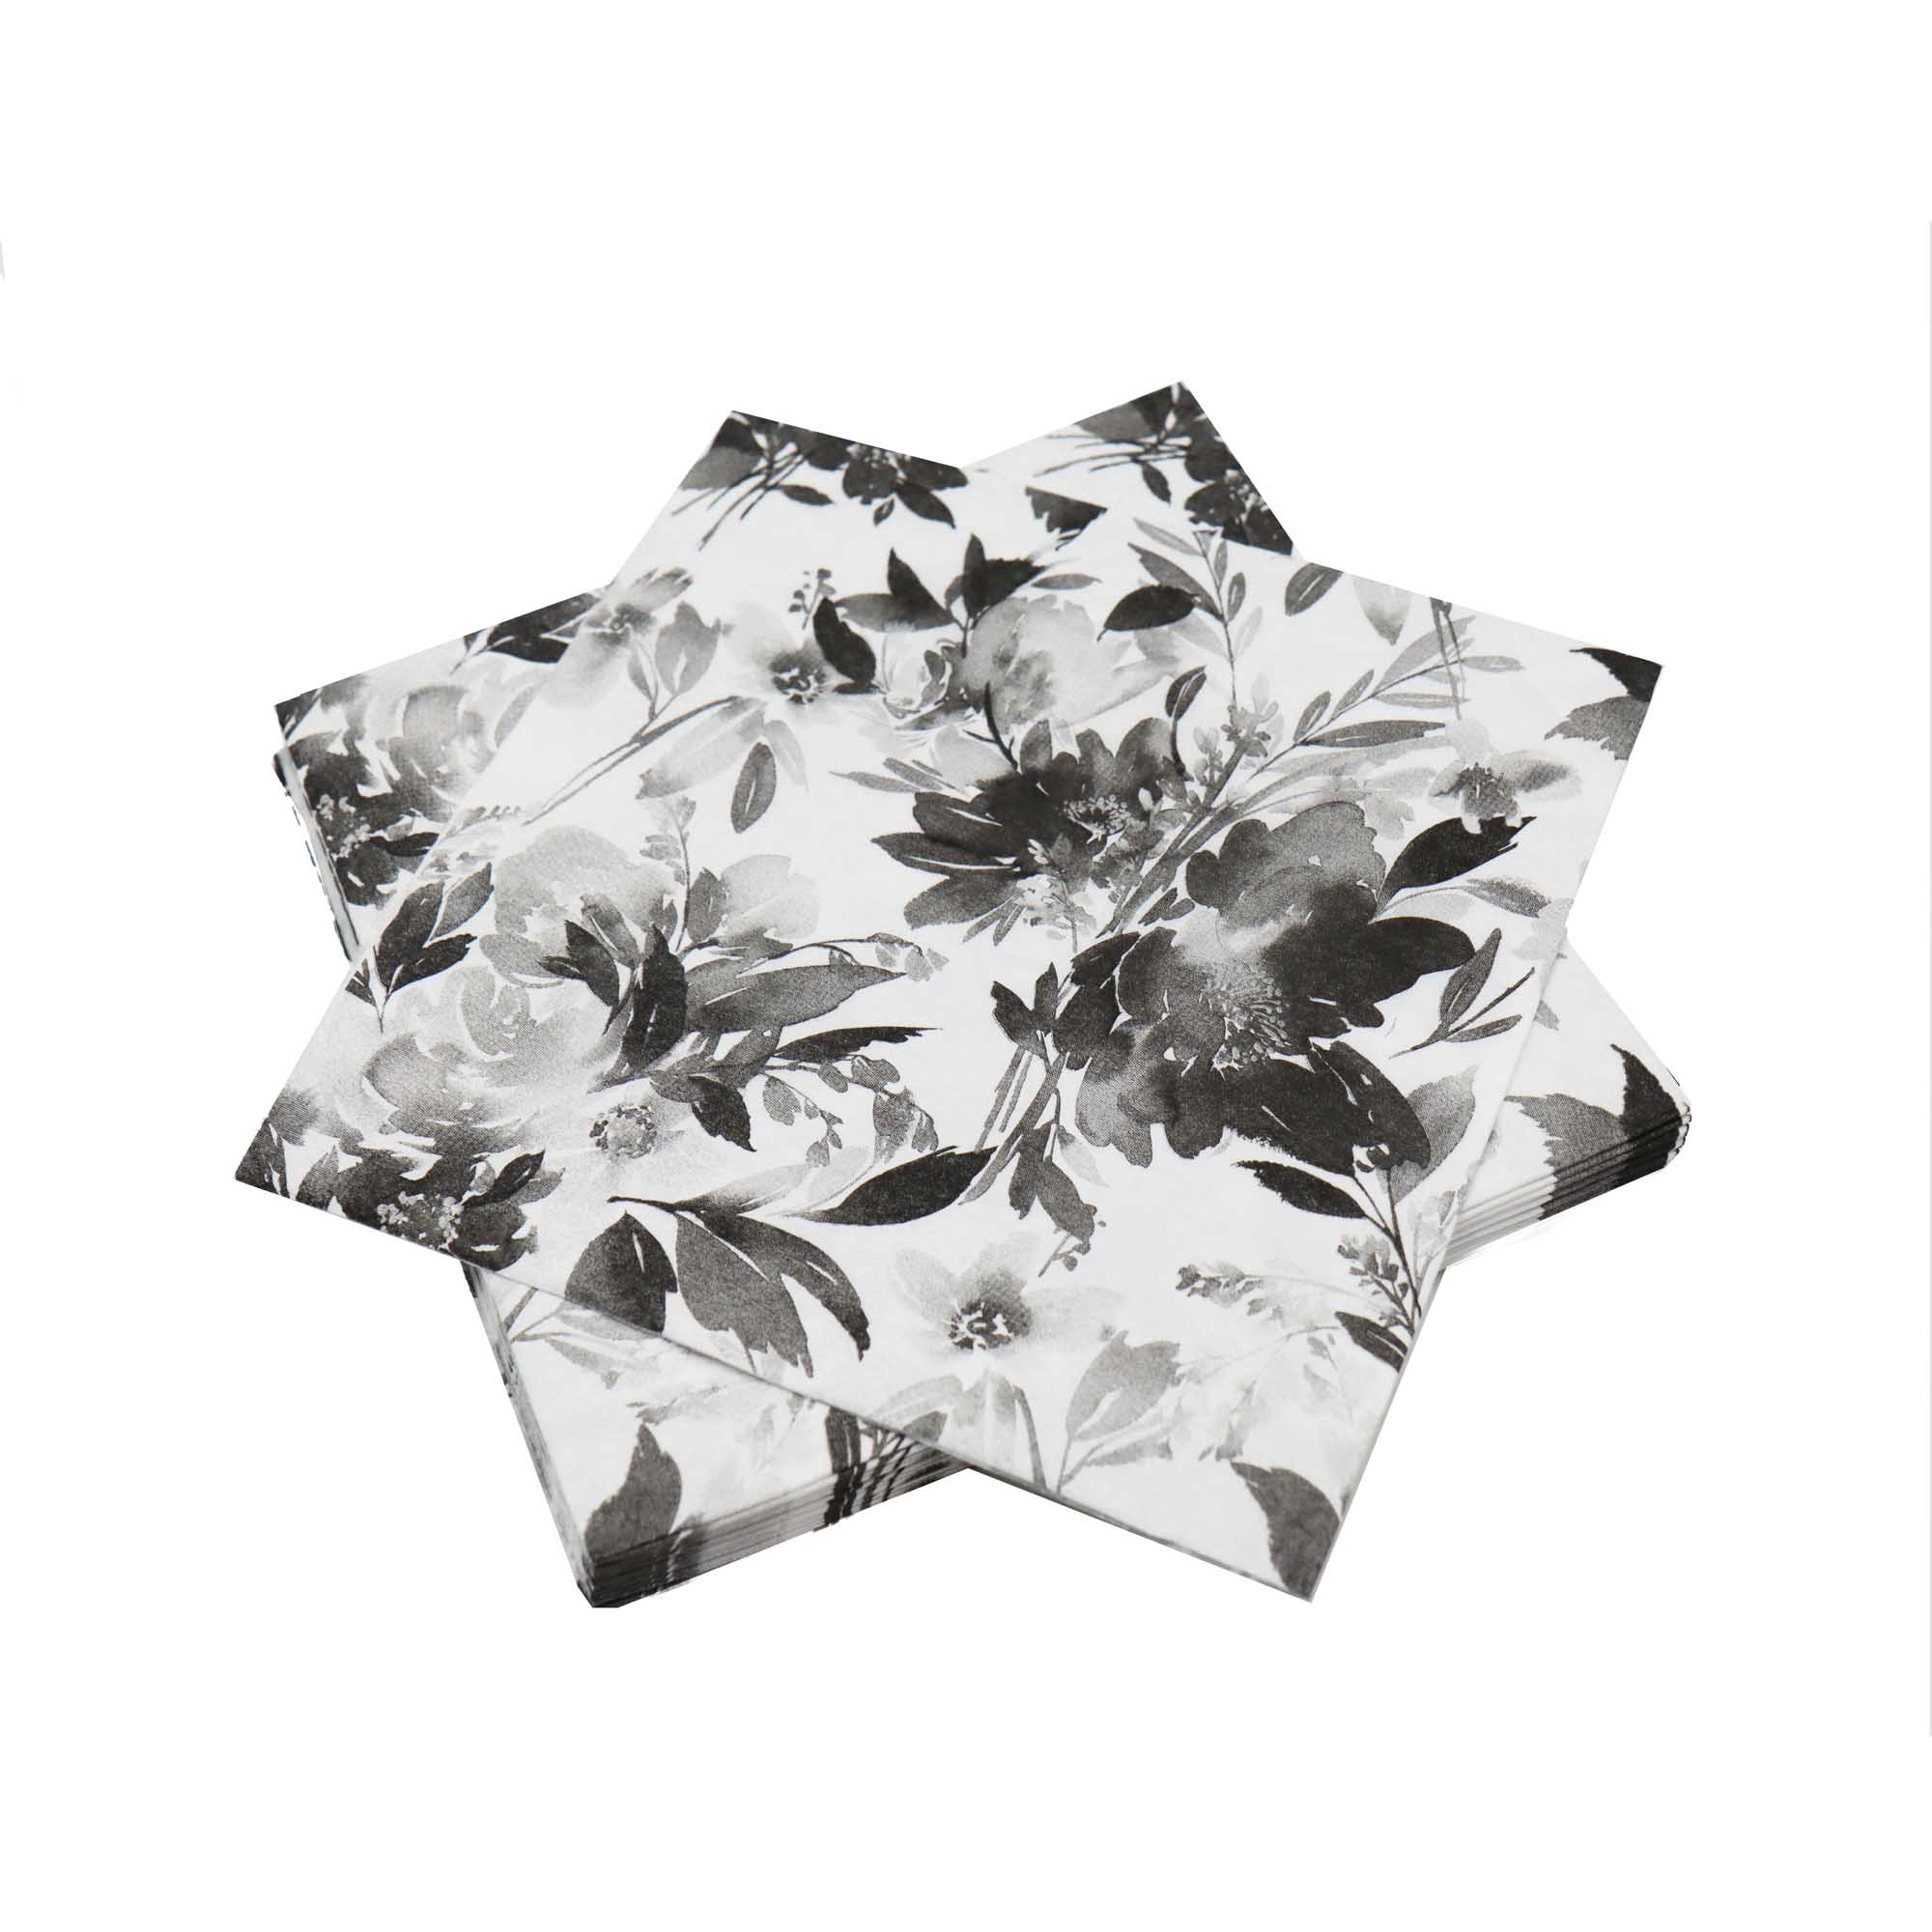 Luncheon Table Serviettes 3ply 33x33cm White with Black Floral 20Pack